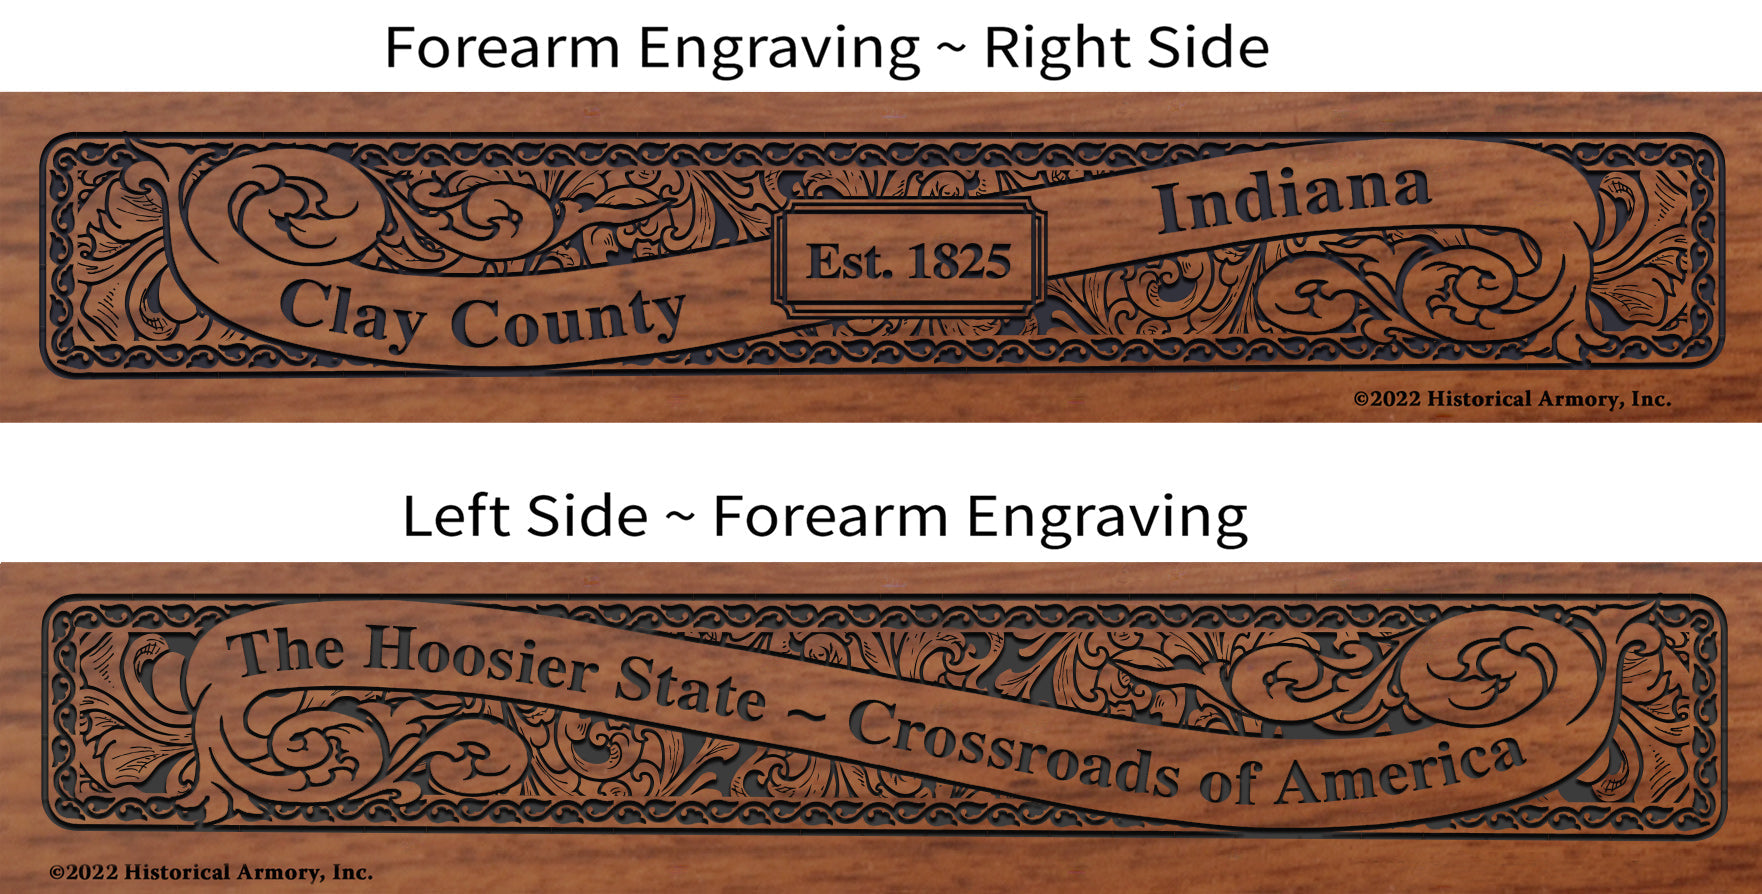 Clay County Indiana Engraved Rifle Forearm